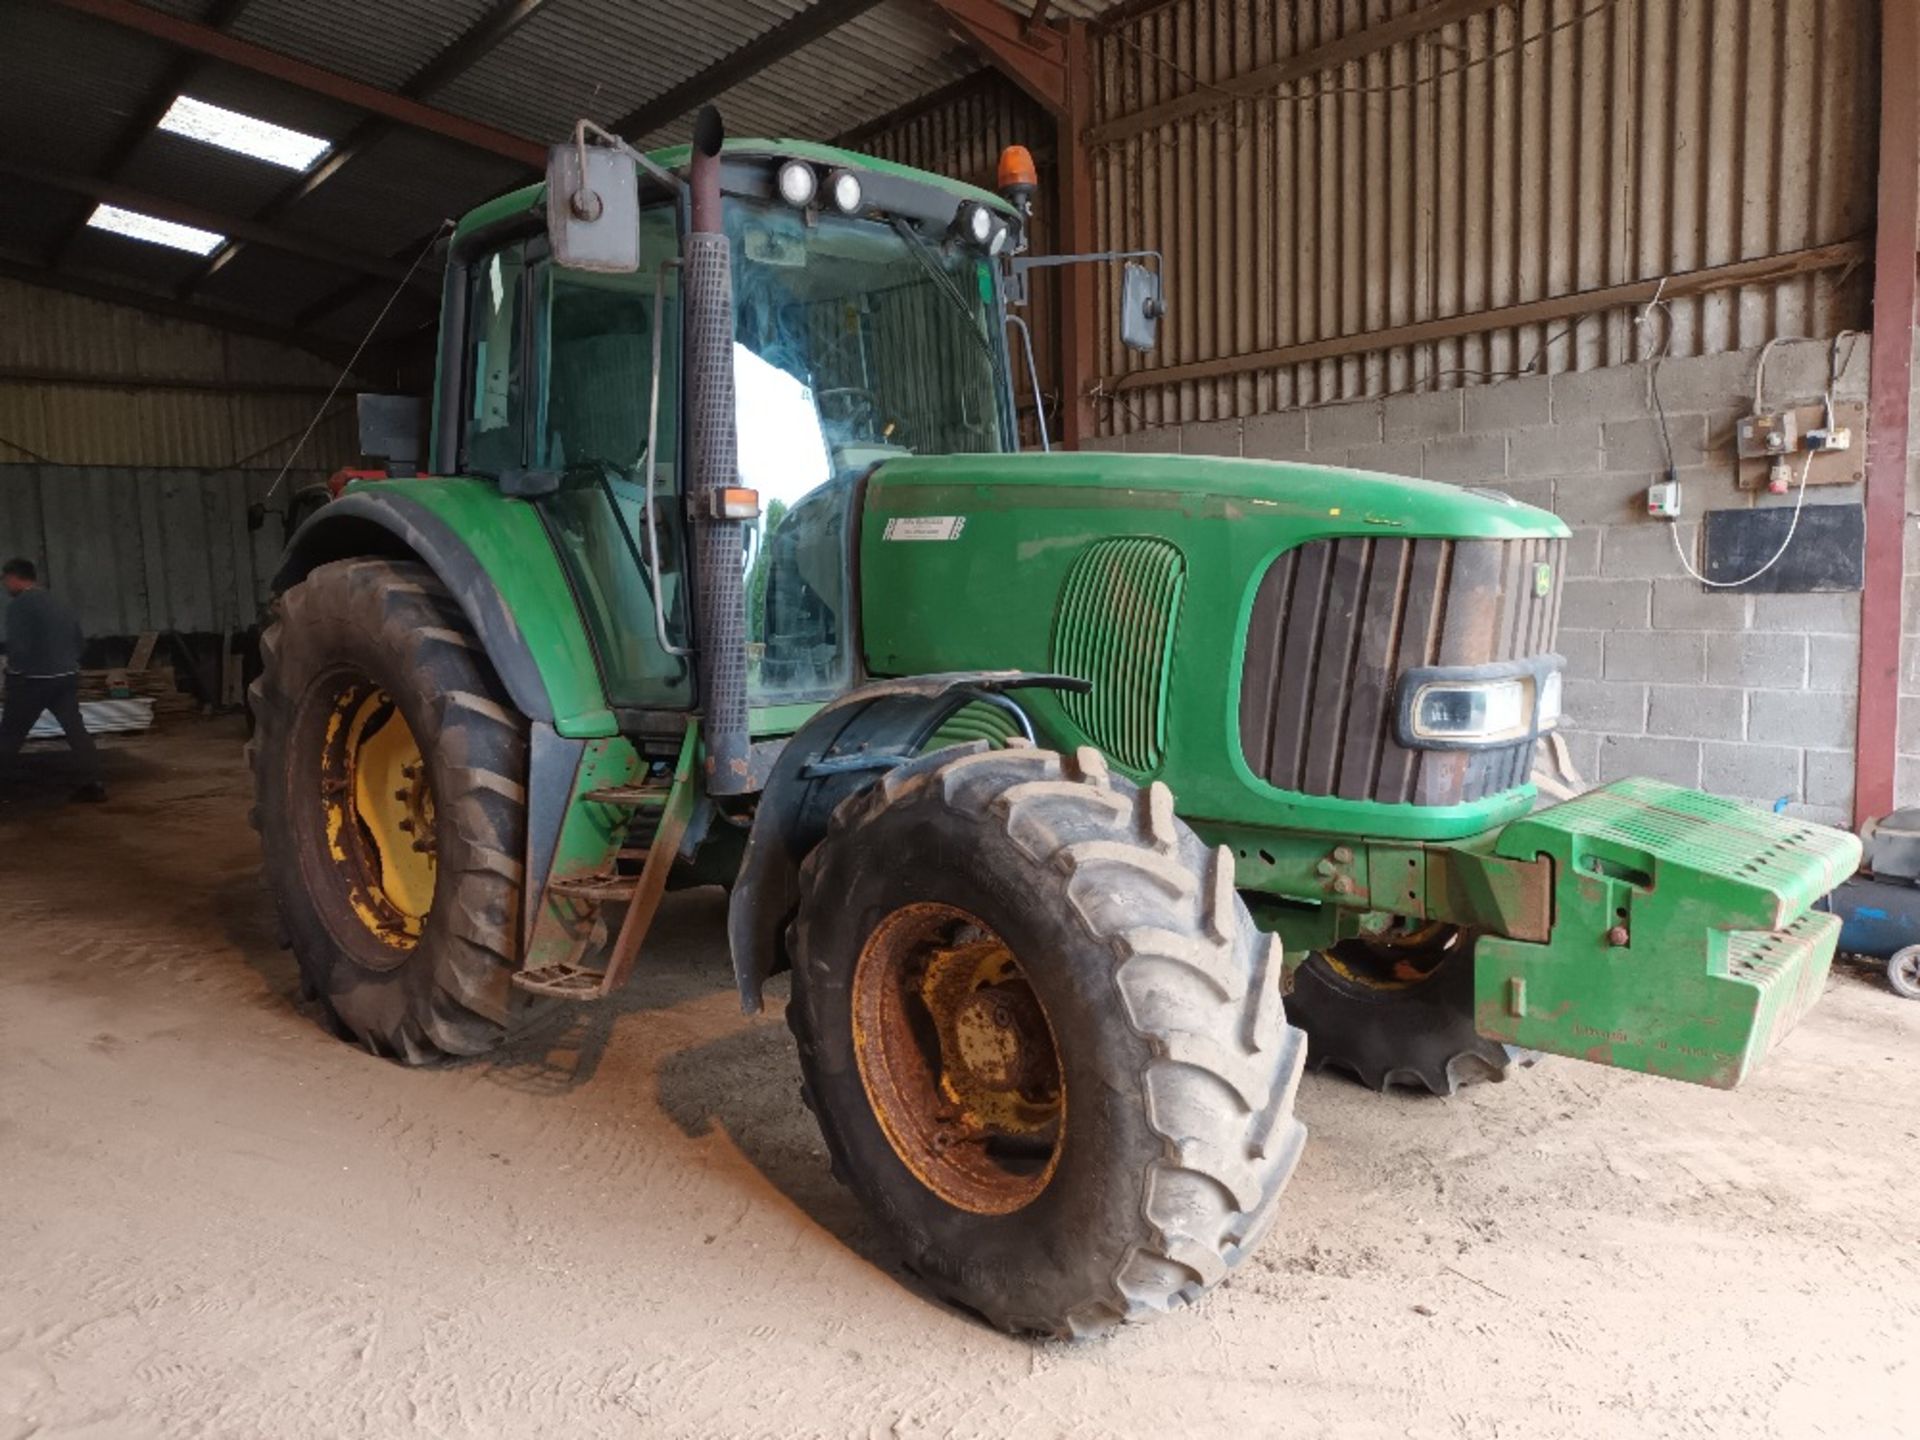 John Deere 6620 4wd tractor, 2002, complete with front weights, 8,964 hours, power shift gear box, - Image 2 of 6